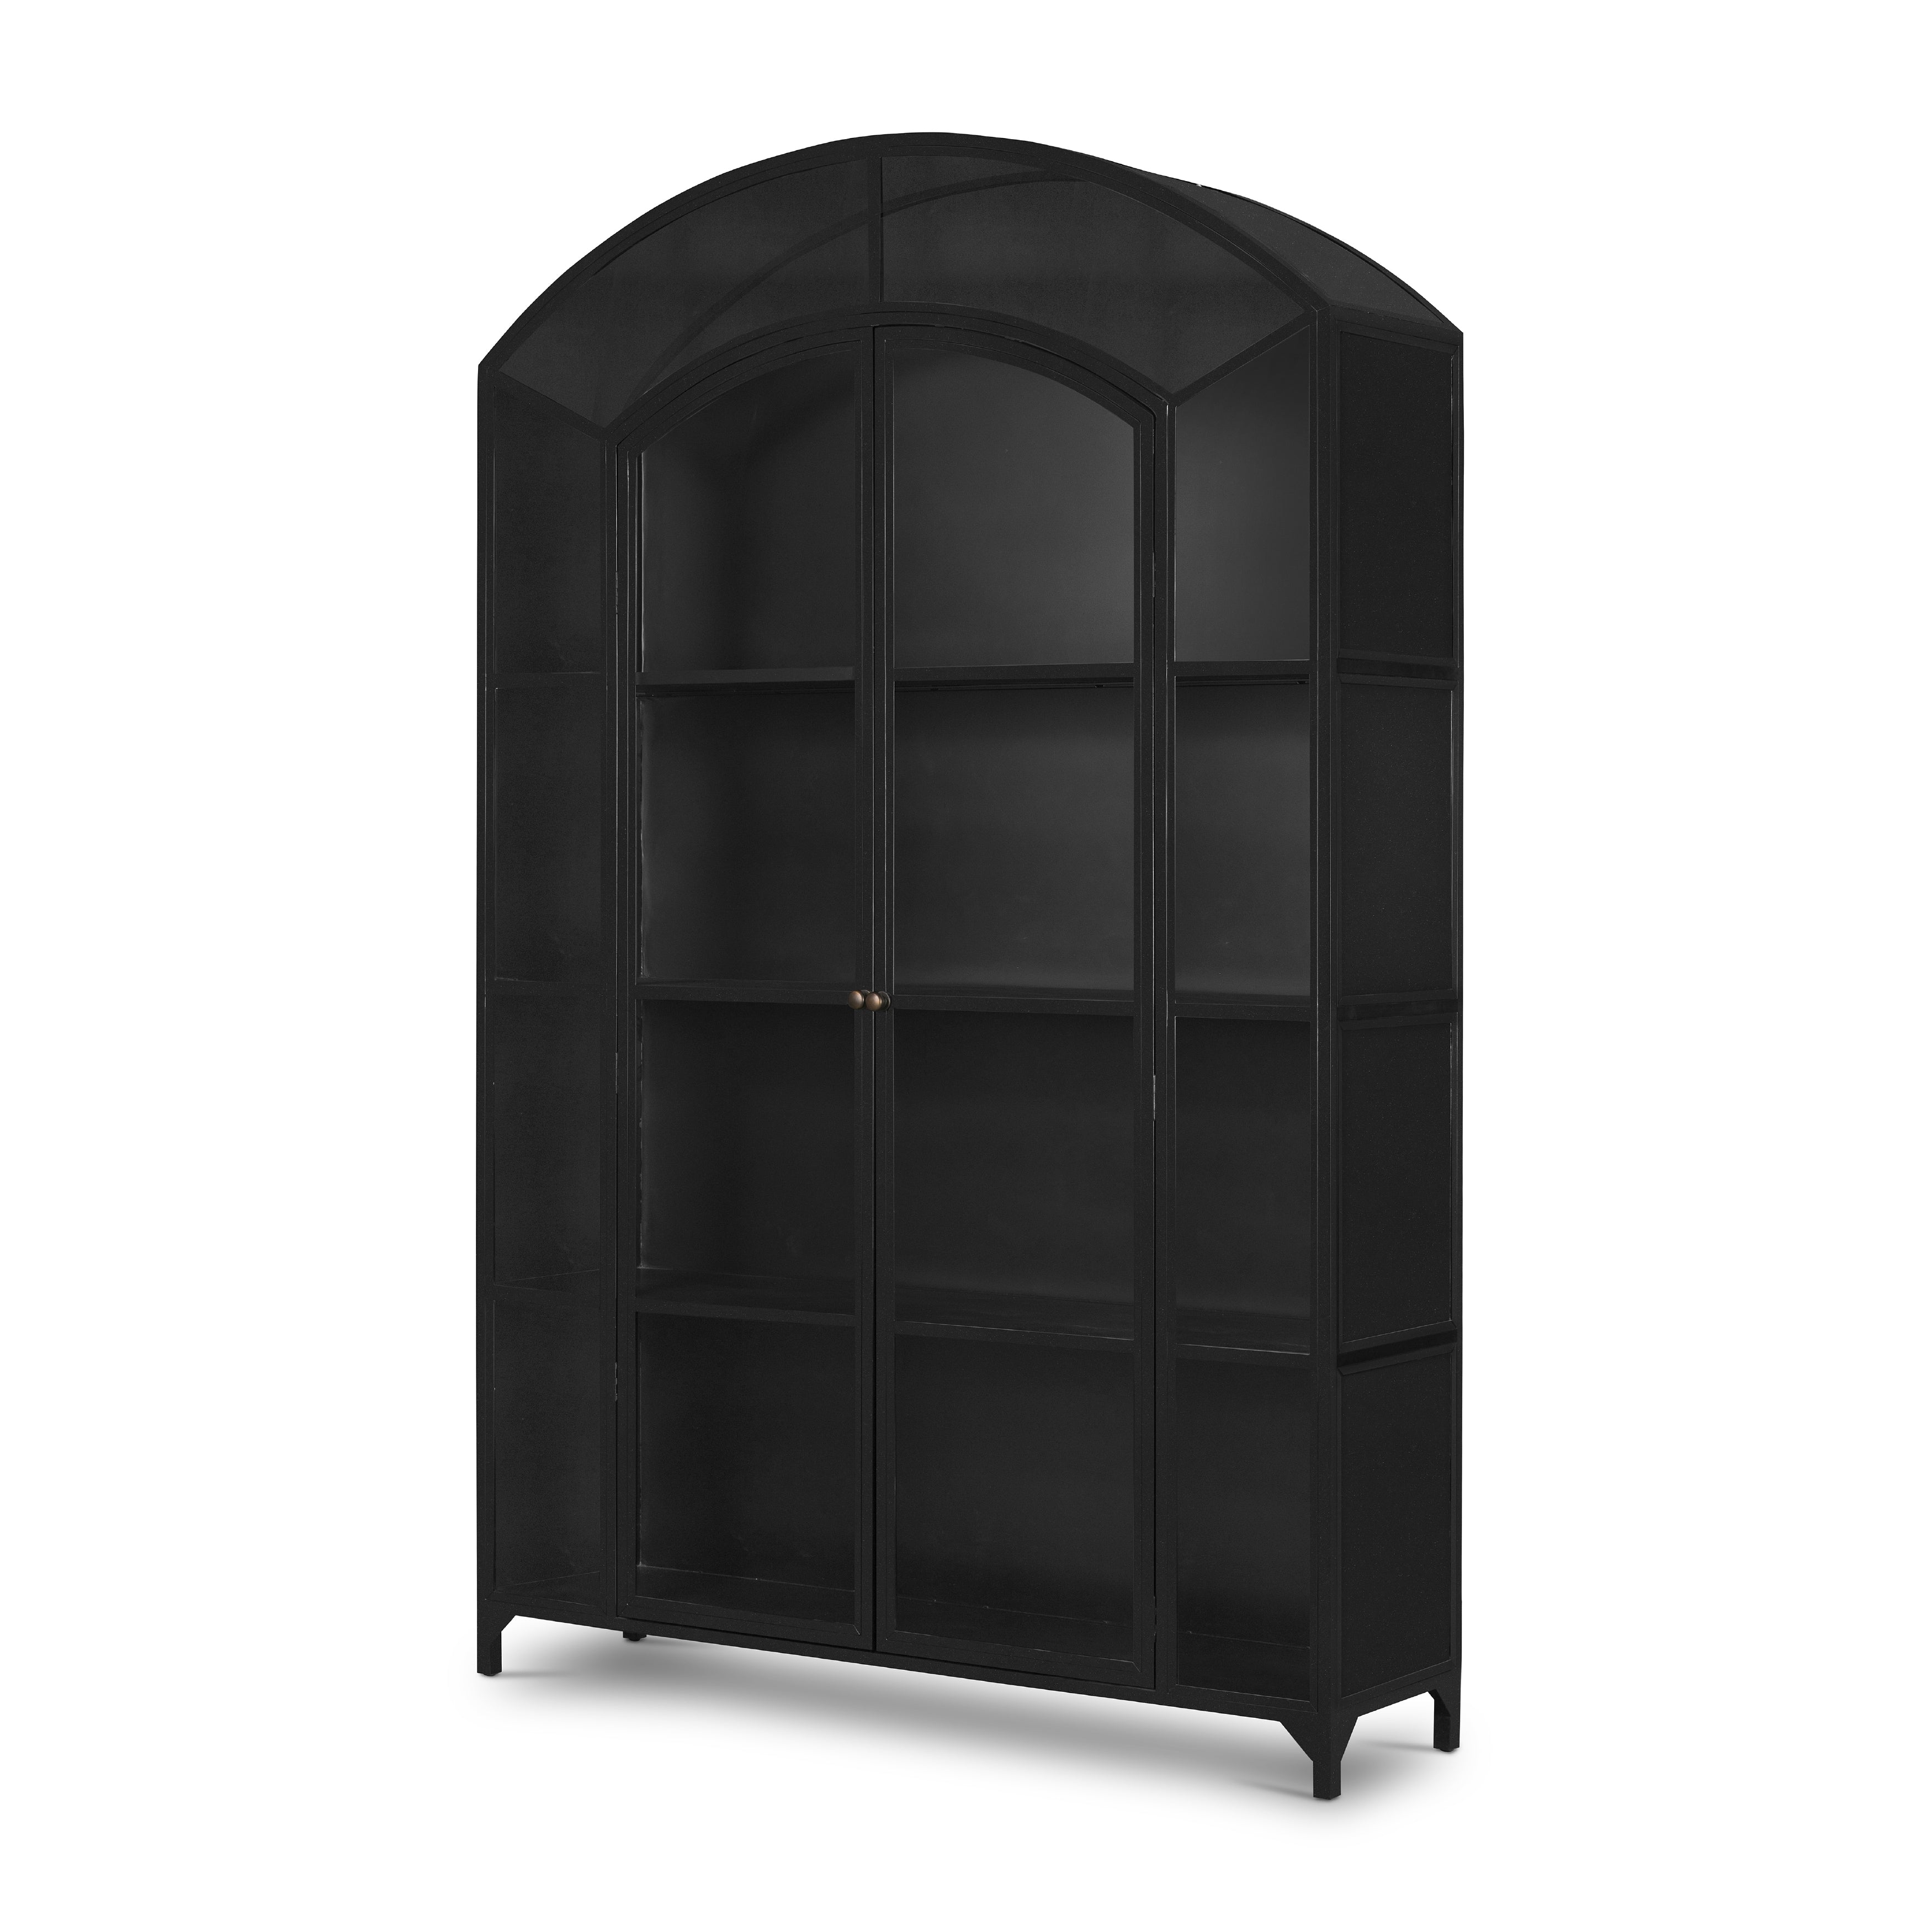 Display barware, books and keepsakes in wide, beautifully arched cabinetry. Solid iron sheeting is finished in a soft, matte black with contrasting brass hardware. Amethyst Home provides interior design, new construction, custom furniture, and area rugs in the Monterey metro area.